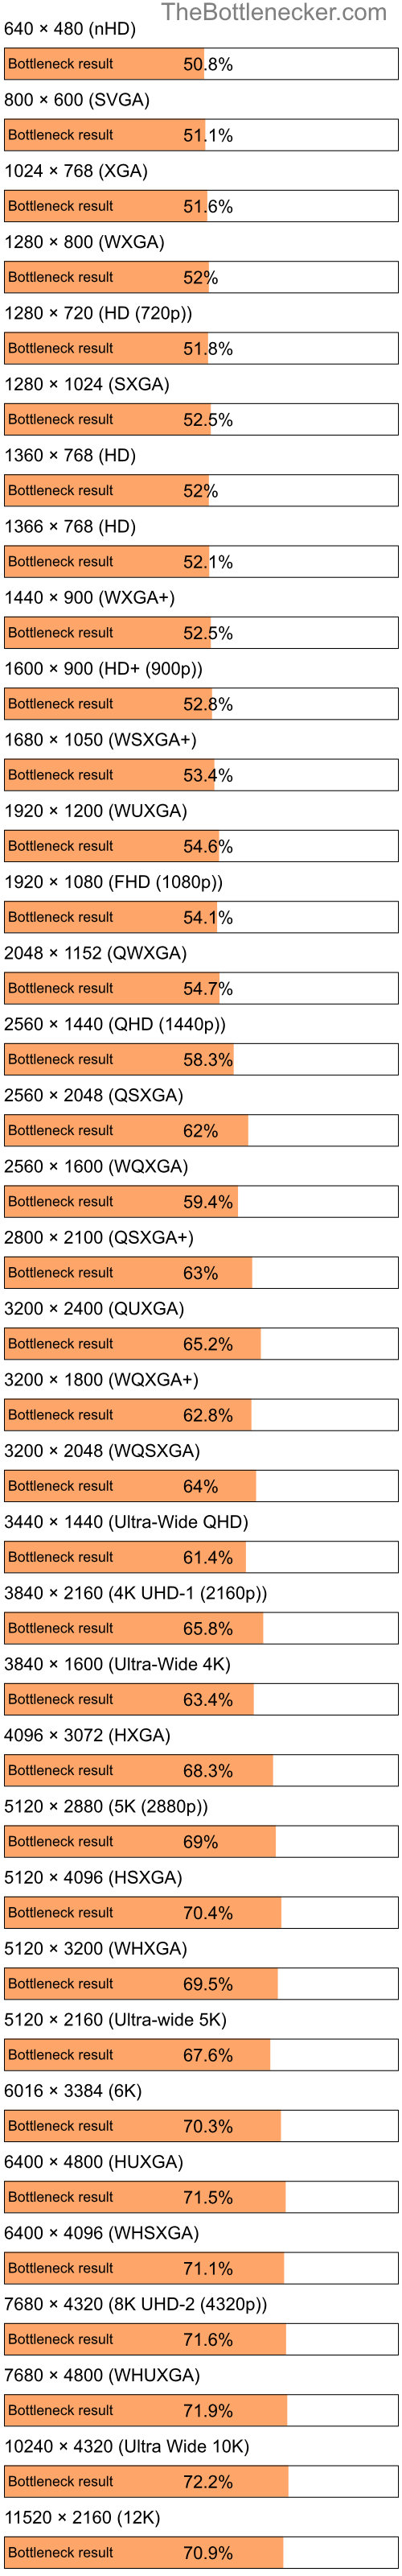 Bottleneck results by resolution for Intel Atom N270 and AMD Radeon HD 7290 in Processor Intense Tasks